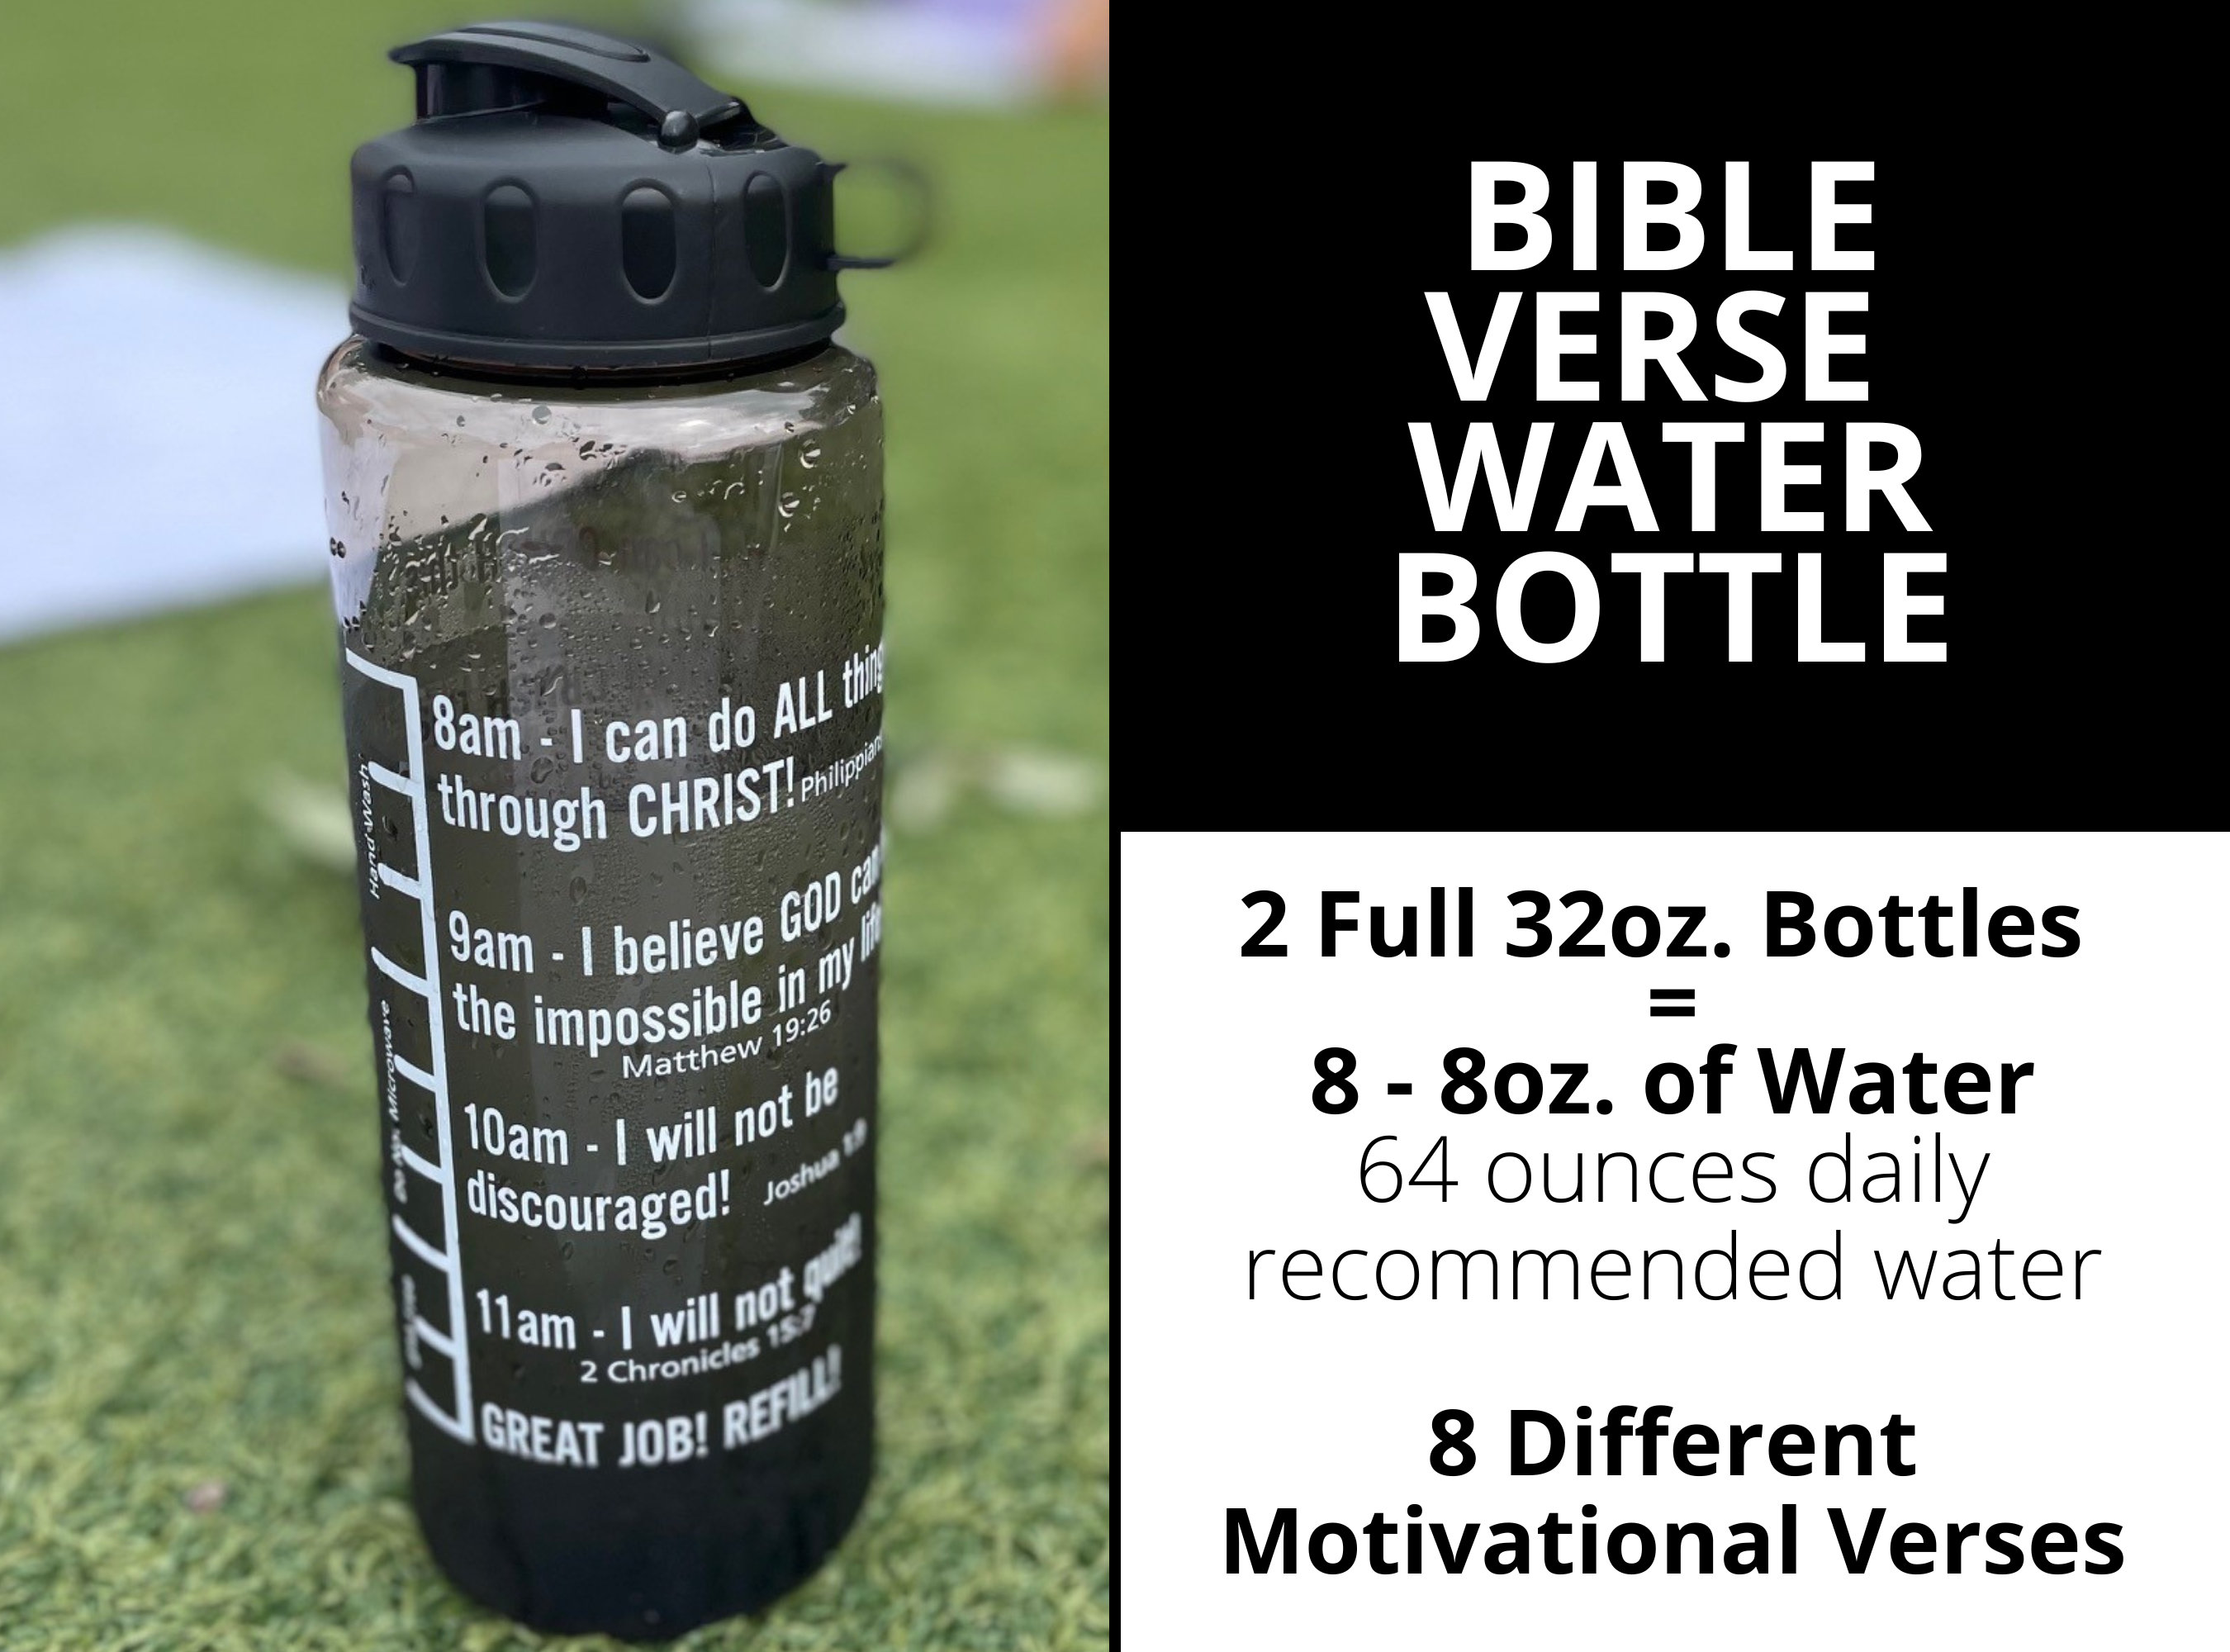  Life Bottle 32 oz Water Bottle with Strap. Flip Top Water  Bottles With Time Marker to Drink. No Quotes! Motivational Water Bottle  Dishwasher Safe : Sports & Outdoors